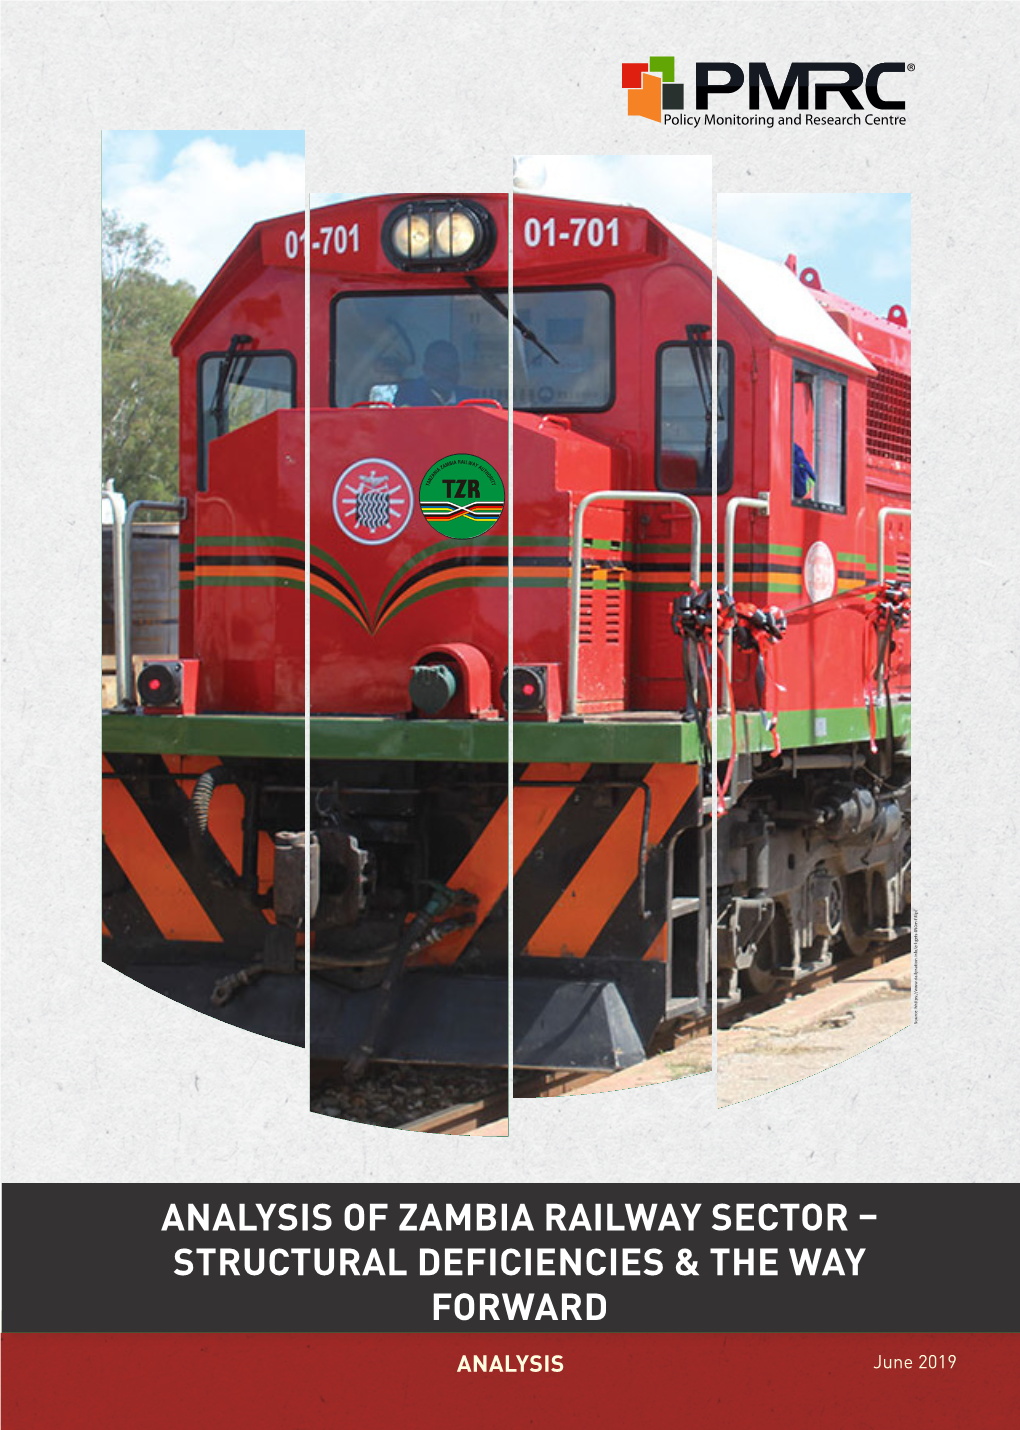 Analysis of Zambia Railway Sector – Structural Deficiencies & the Way Forward